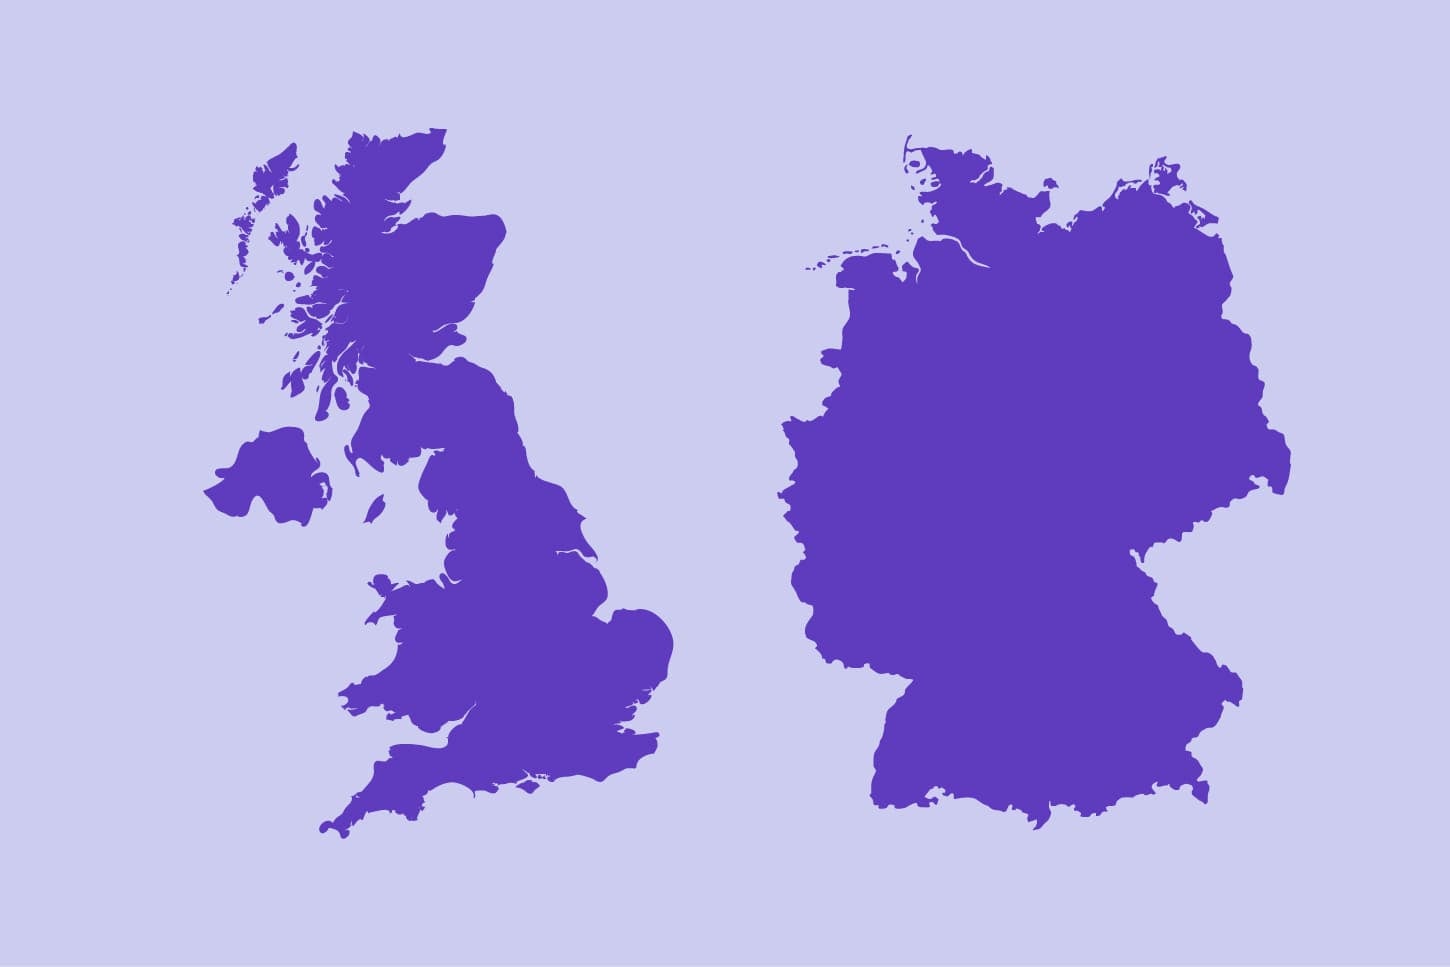 UK and Germany map